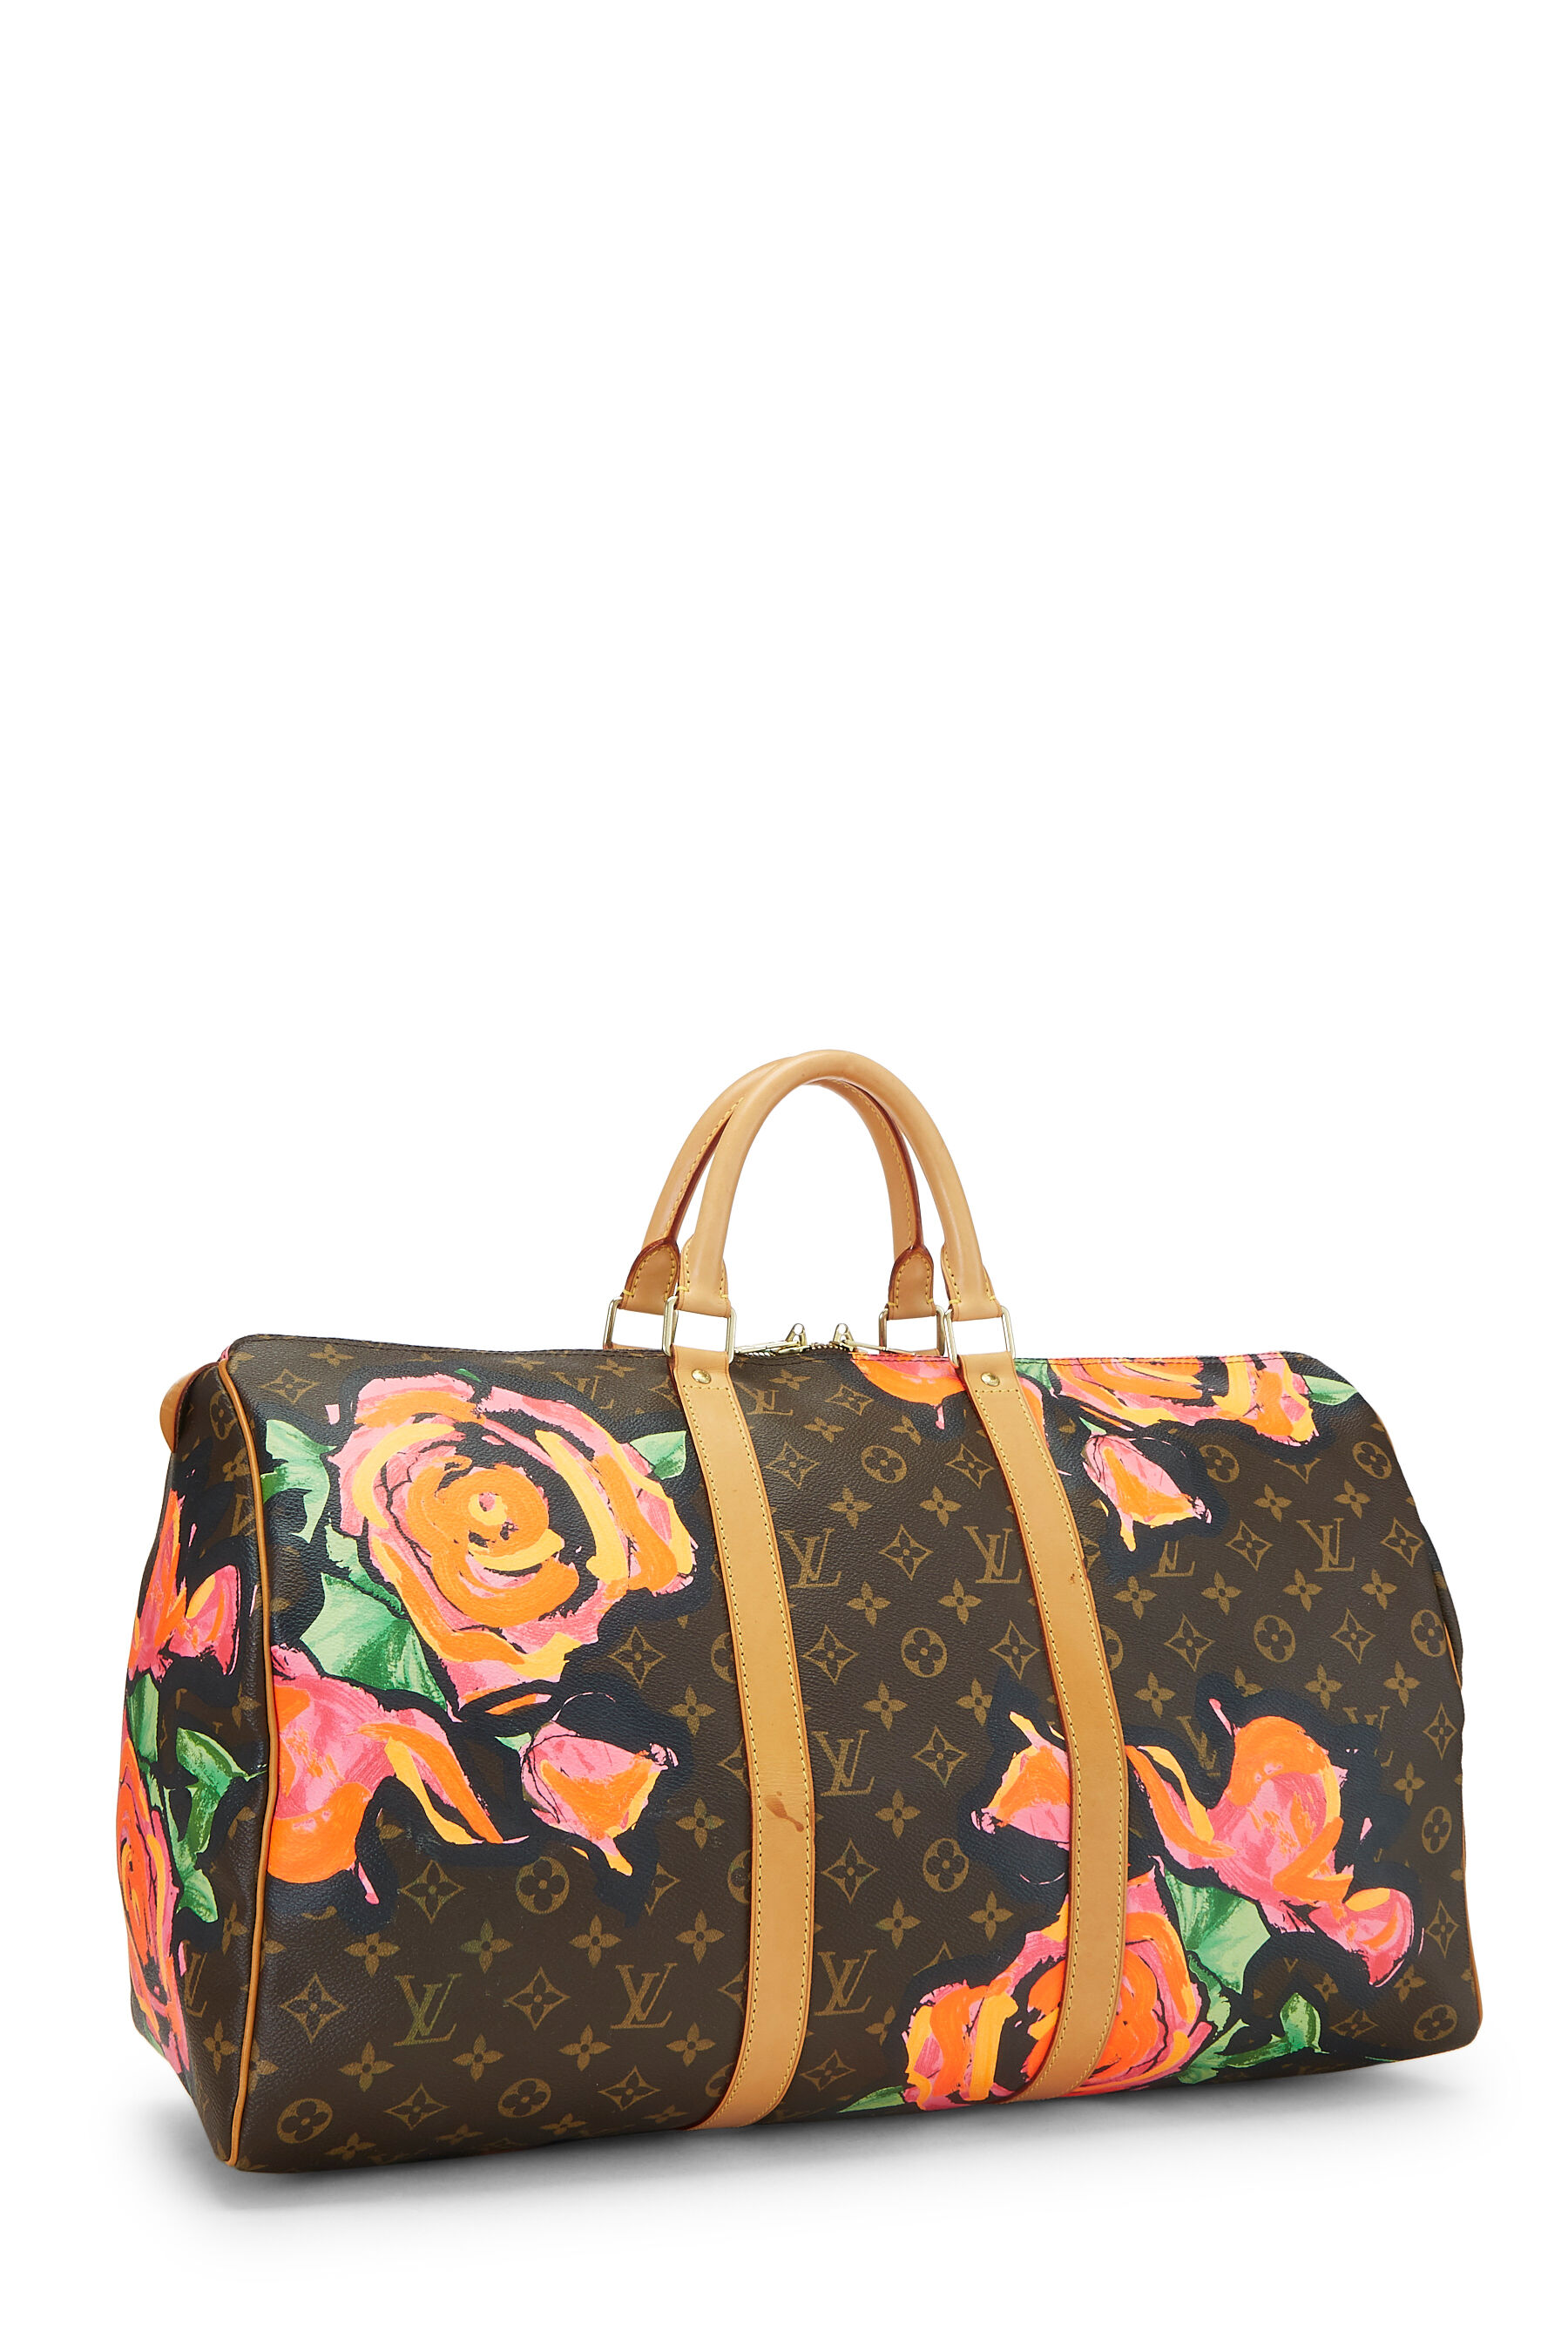 S/S 19' Louis Vuitton 50 Keepall “Prism” for Sale in Round Rock, TX